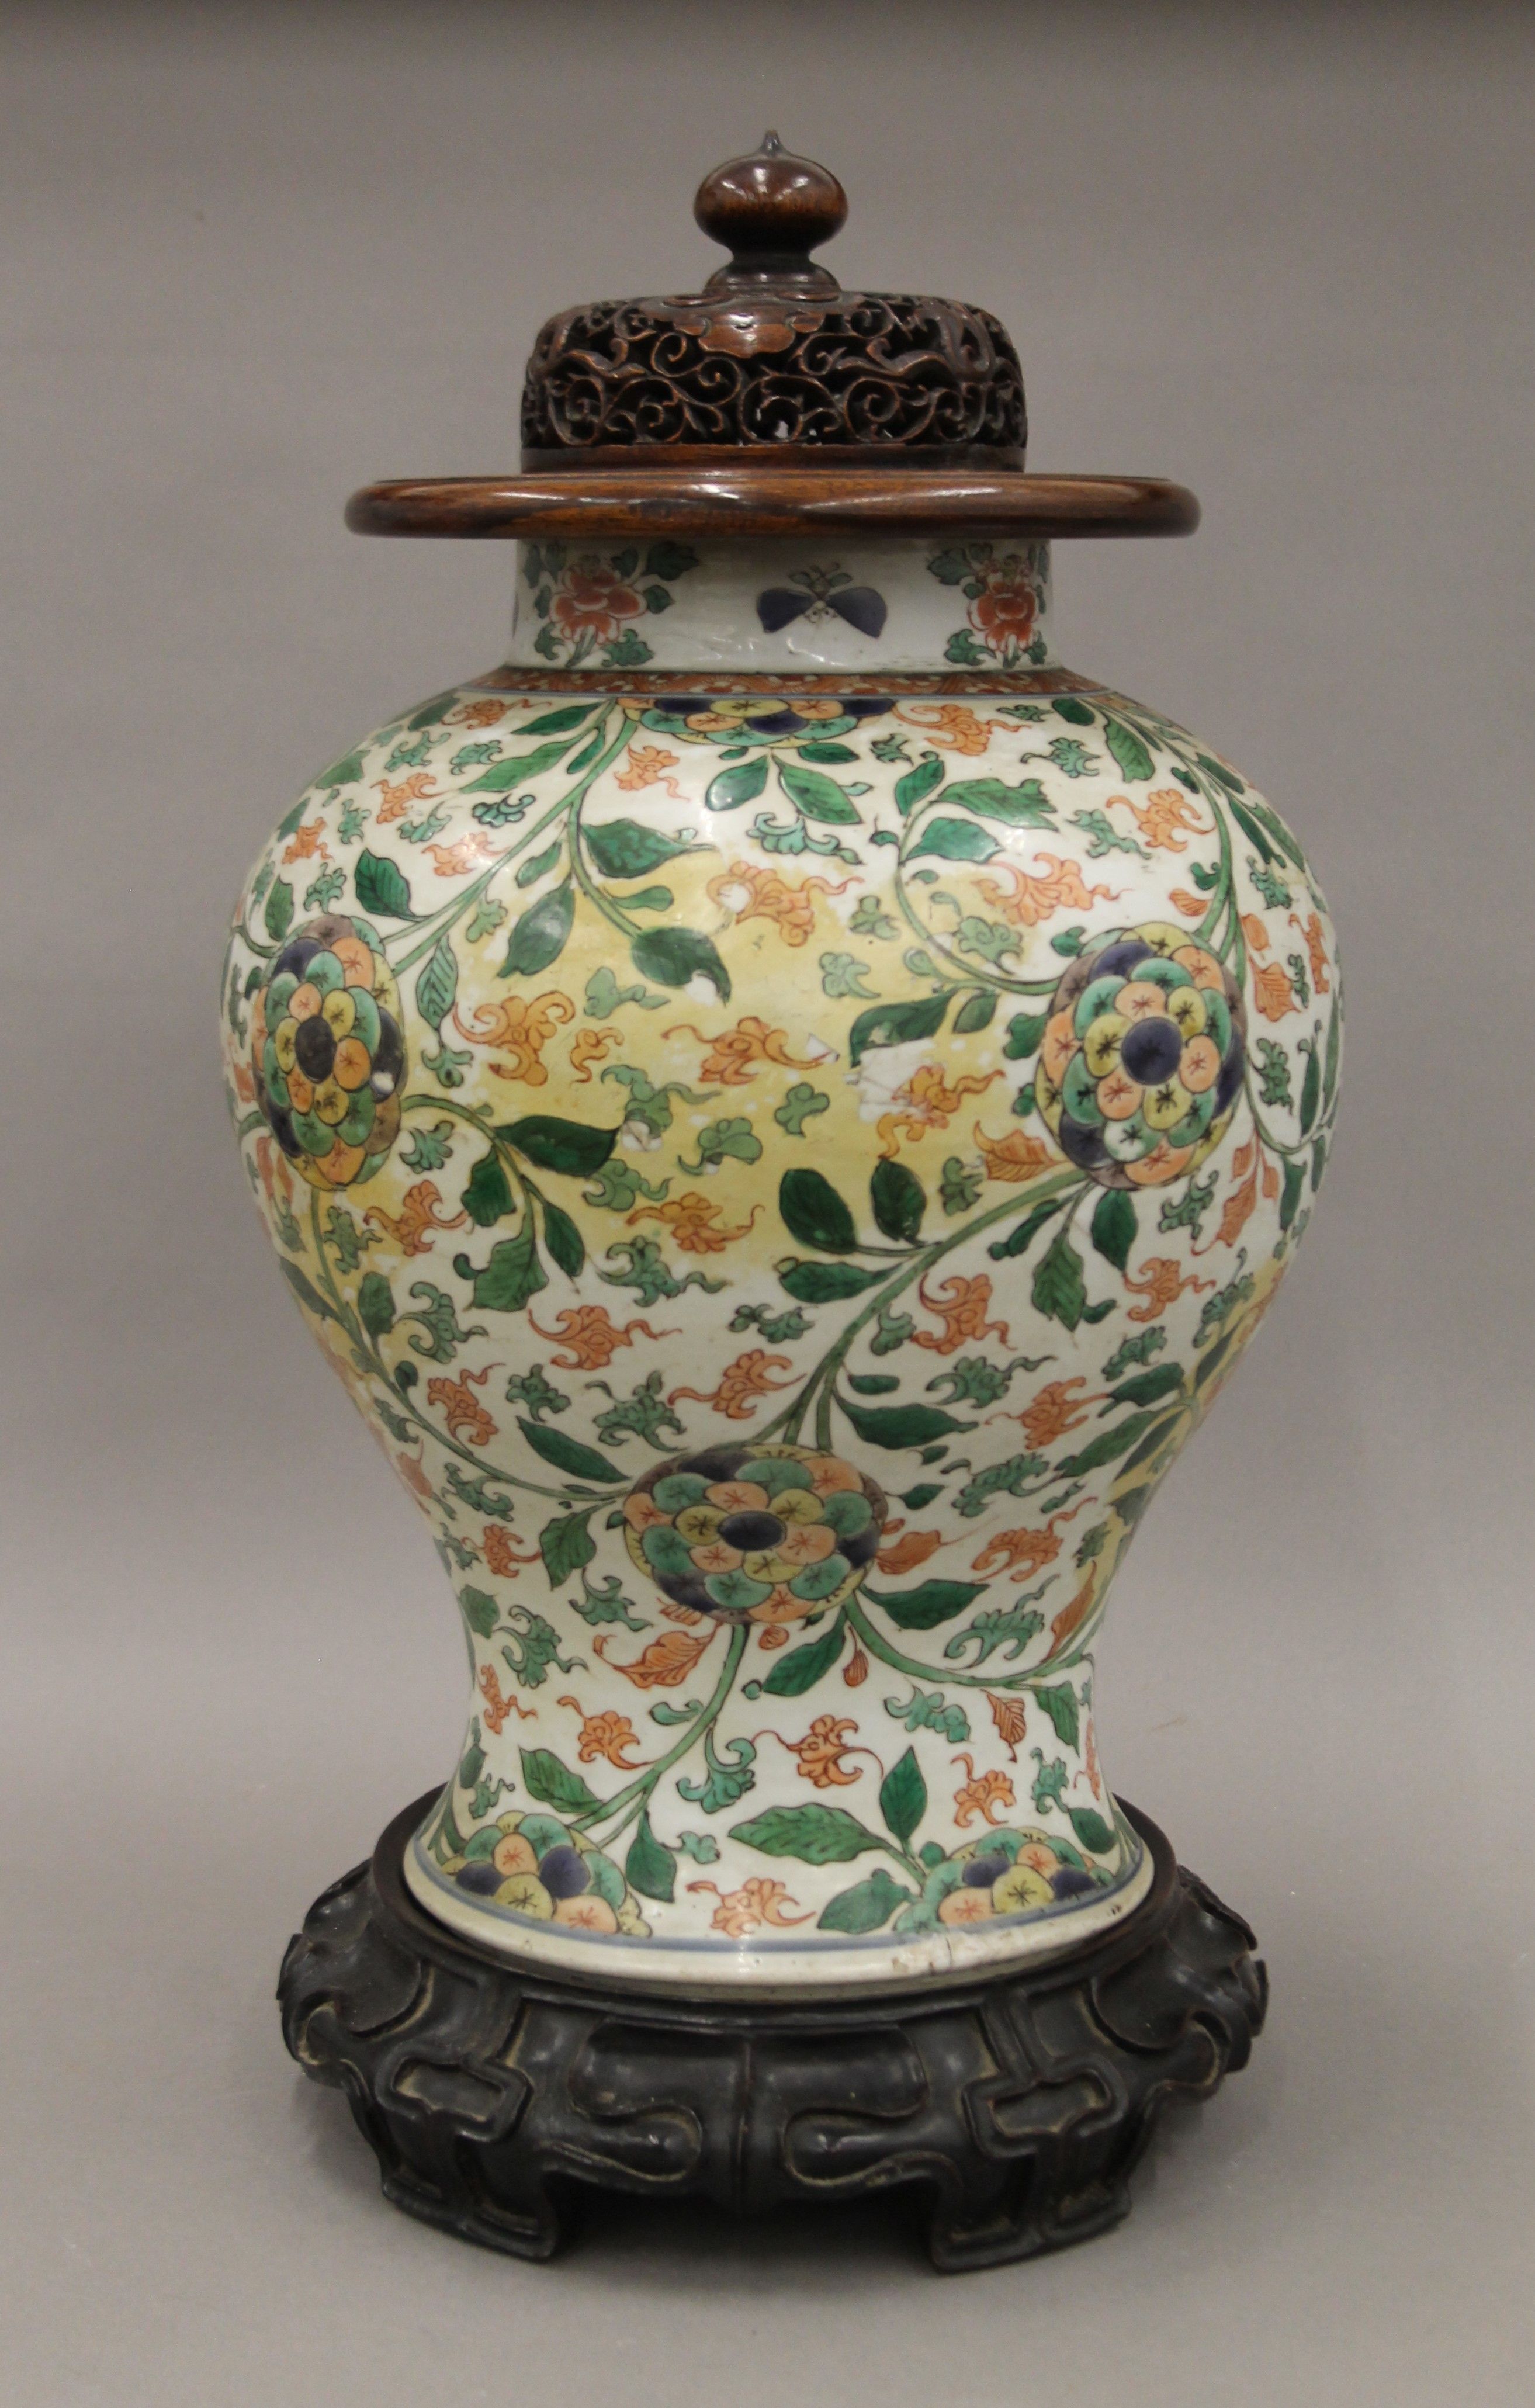 A 18th/19th century Chinese porcelain vase with pierced wooden lid and carved wooden stand. - Image 2 of 8